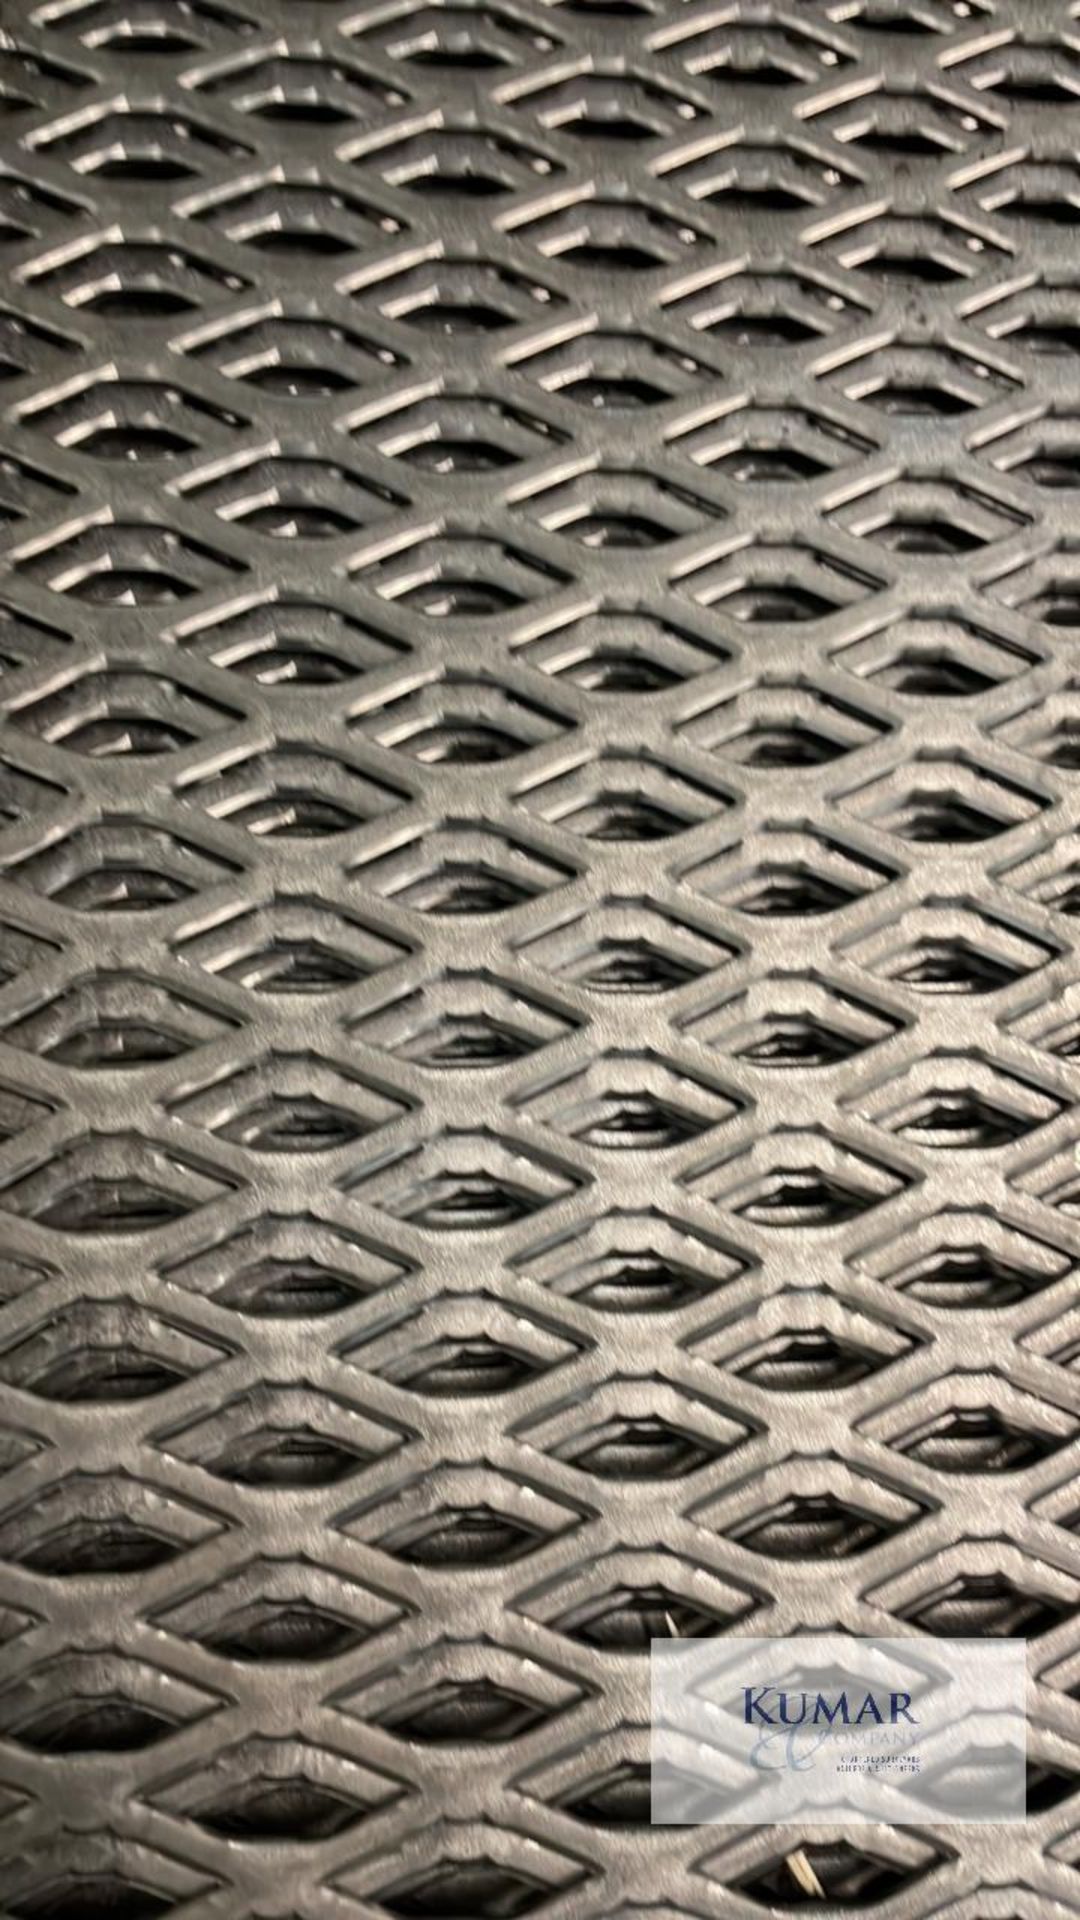 Perforated sheet metal Approx 9 - 8x4 ft sheets 3mm thickness - Image 2 of 3